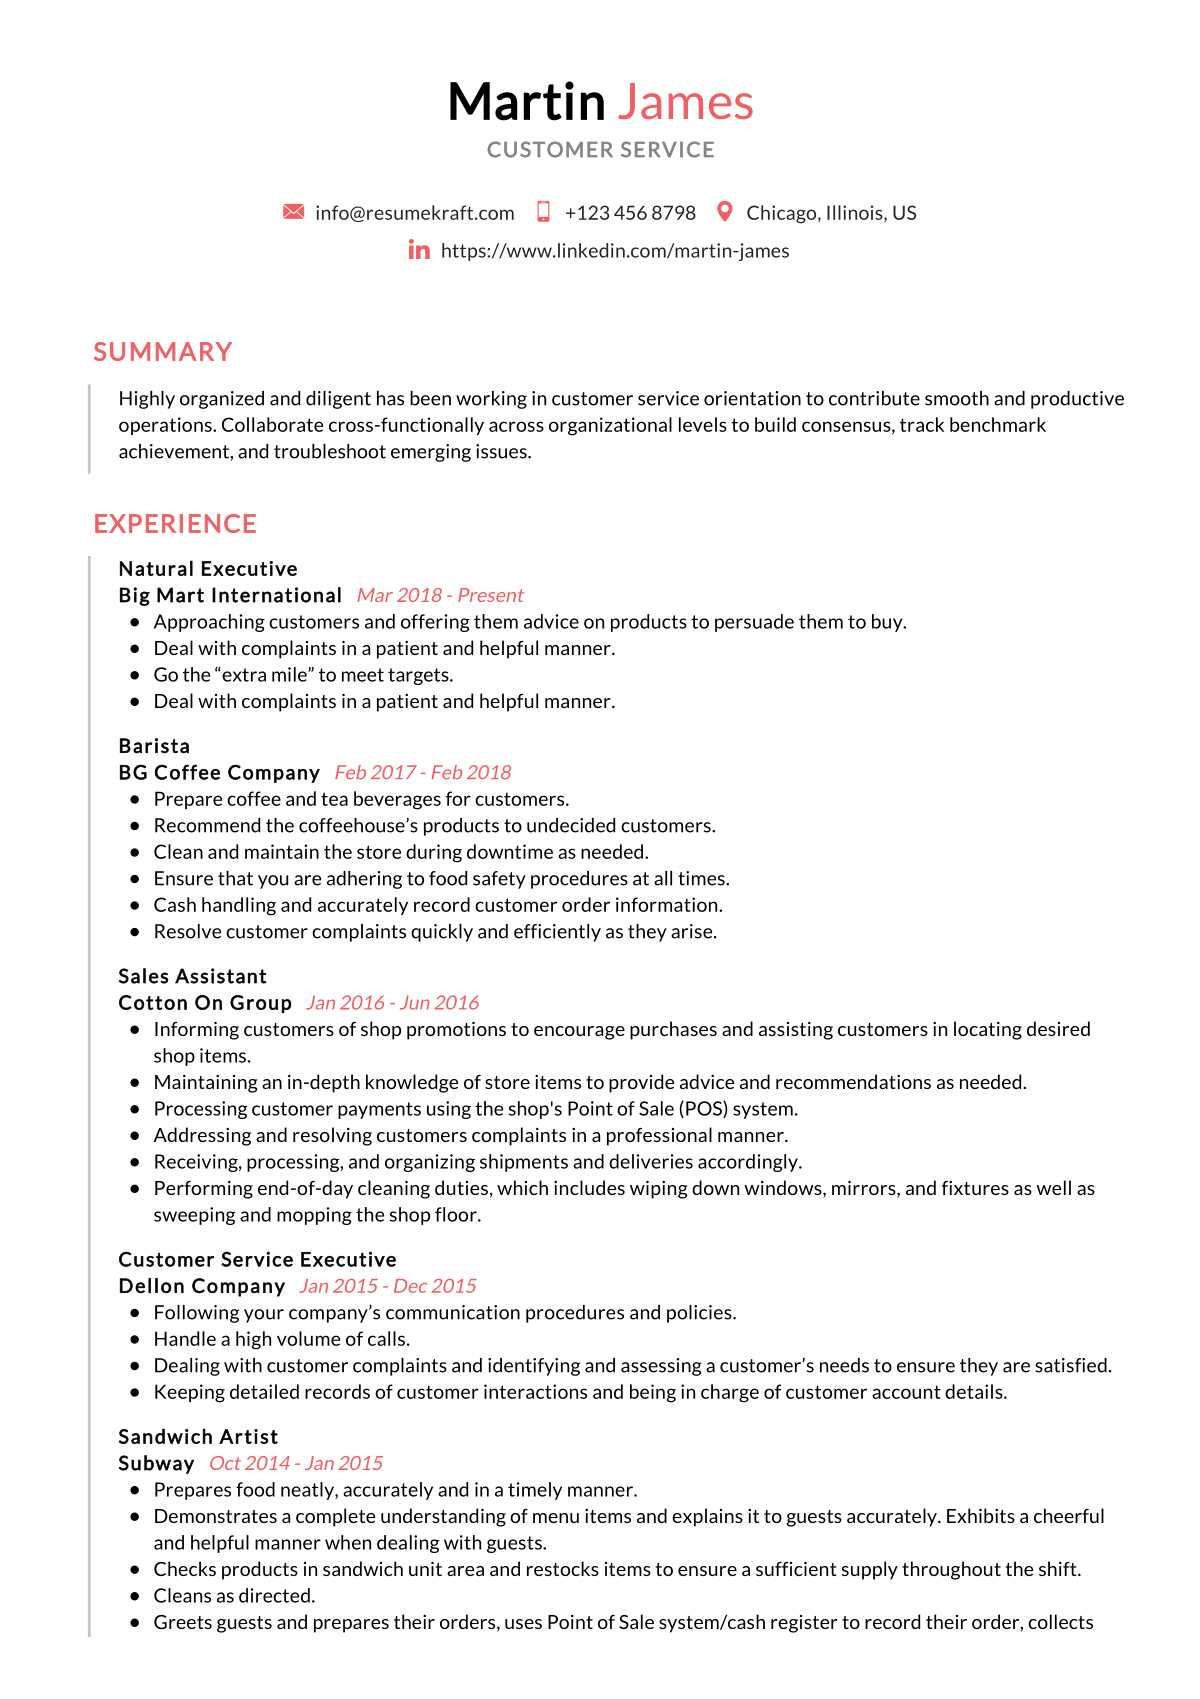 Resume Samples for Customer Service Executive Customer Service Resume Example 2021 Writing Tips – Resumekraft